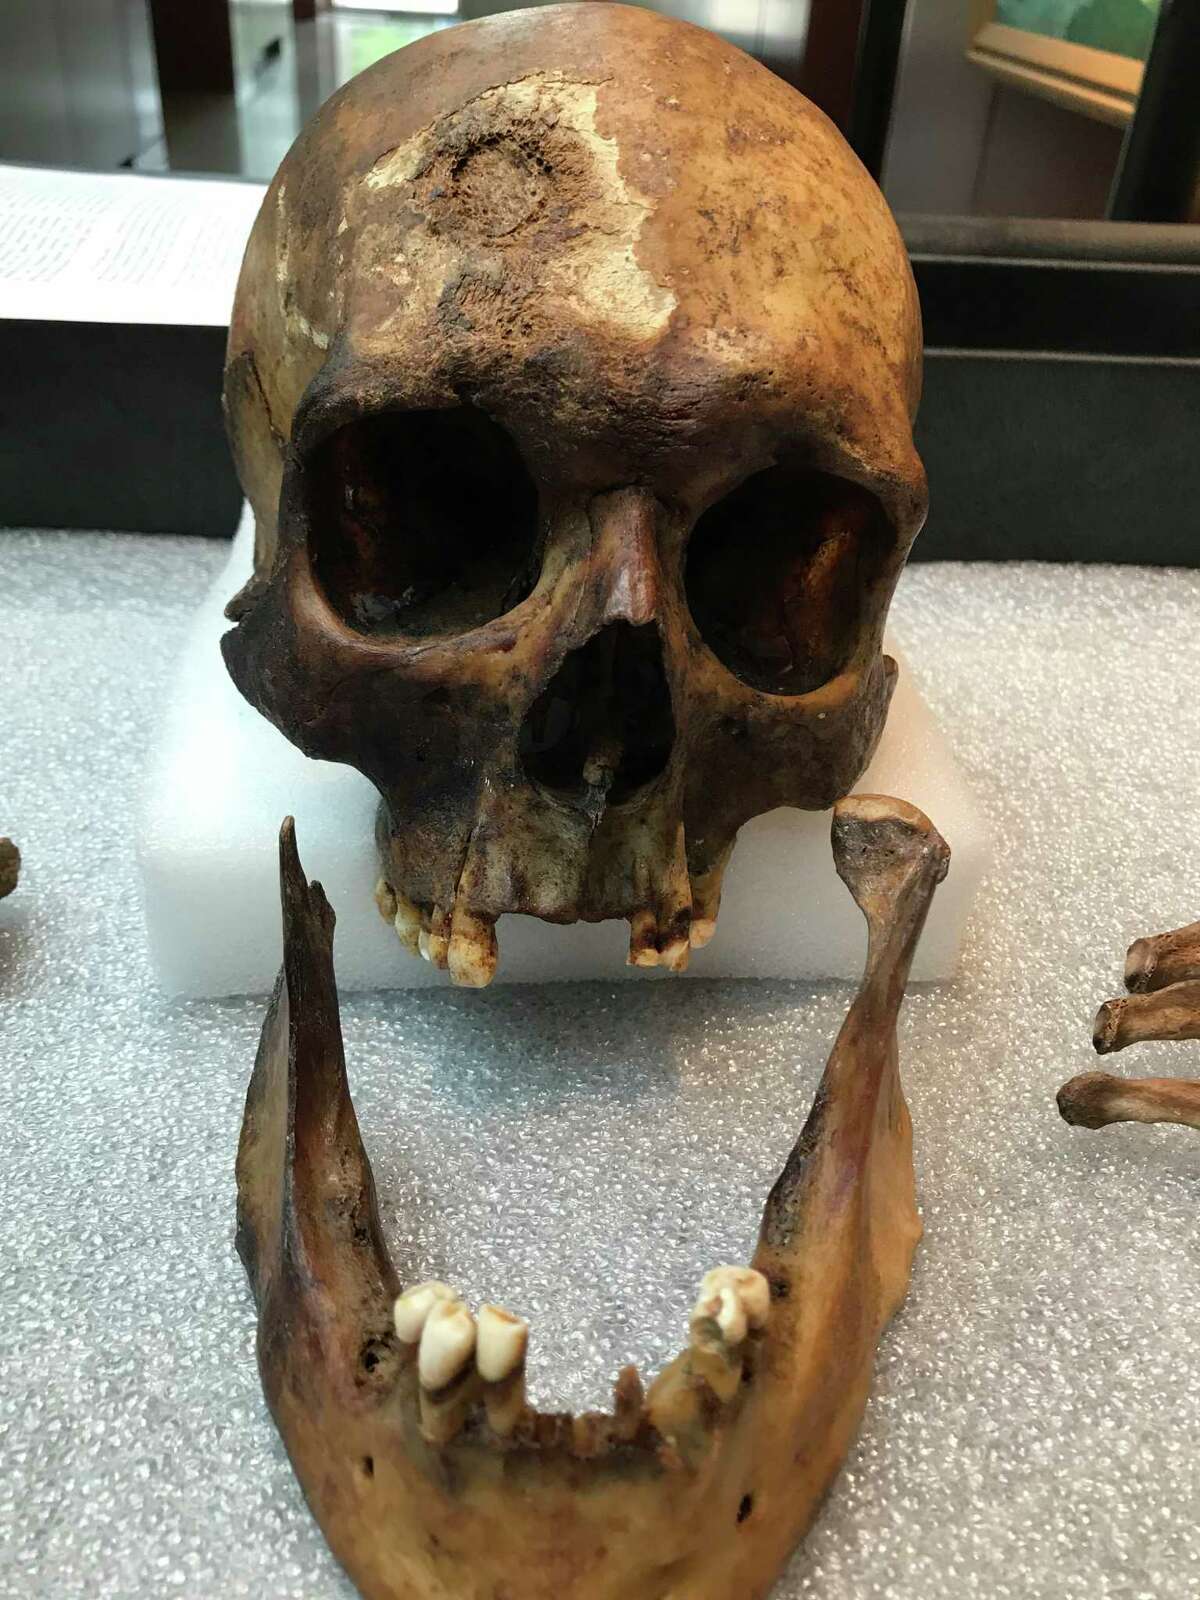 The skull of the man believed to be John Barber at the National Museum of Health and Medicine in Silver Spring, Maryland, on July 23, 2019.